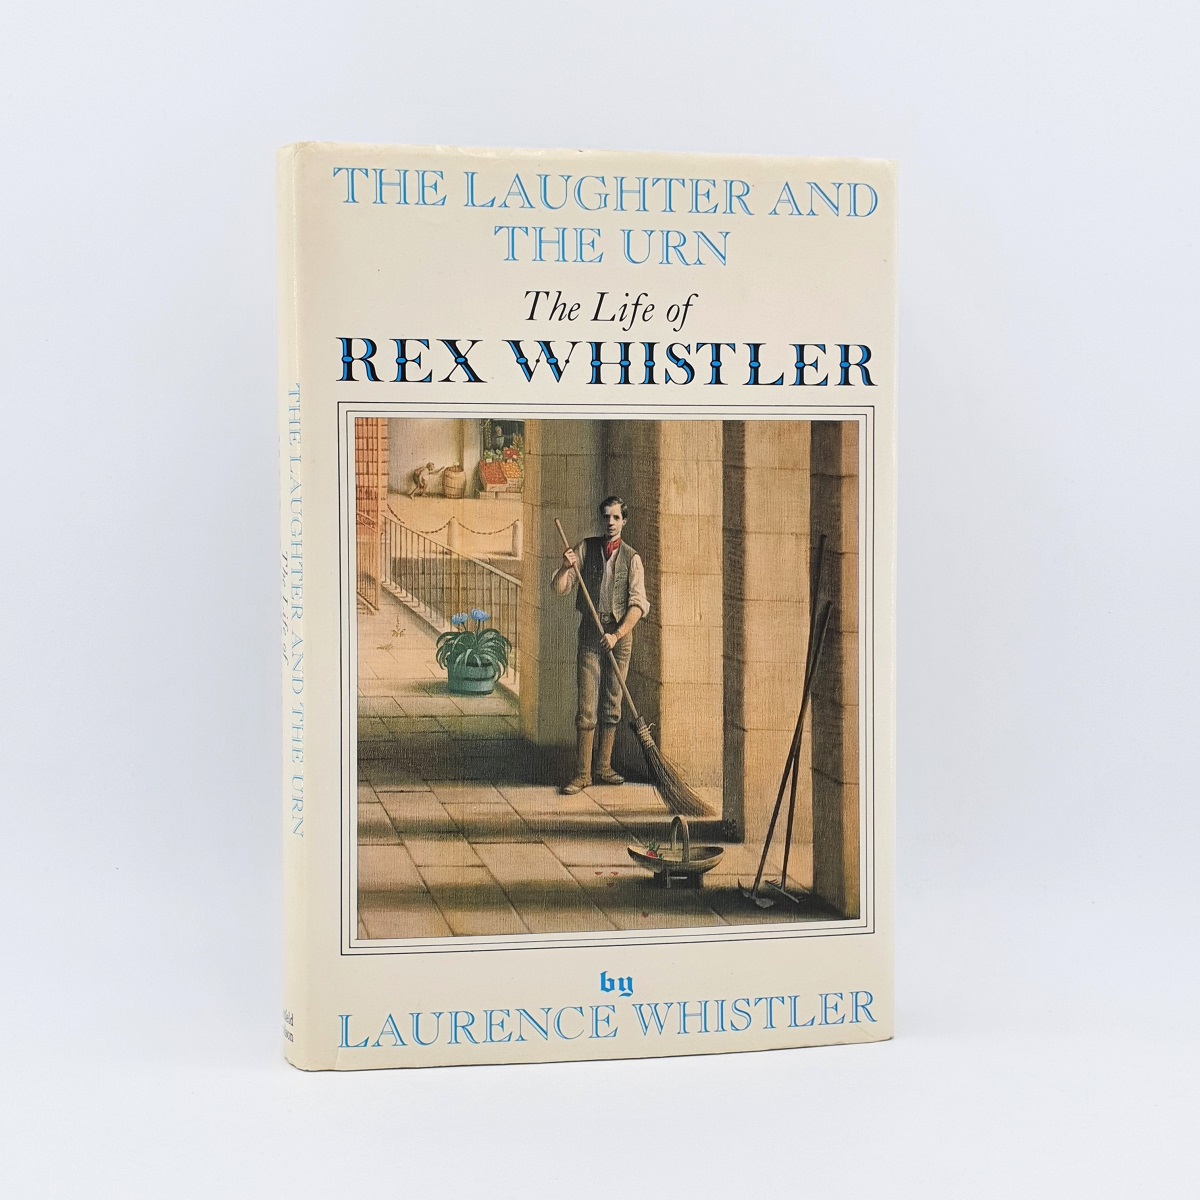 The Laughter and the Urn. The Life of Rex Whistler